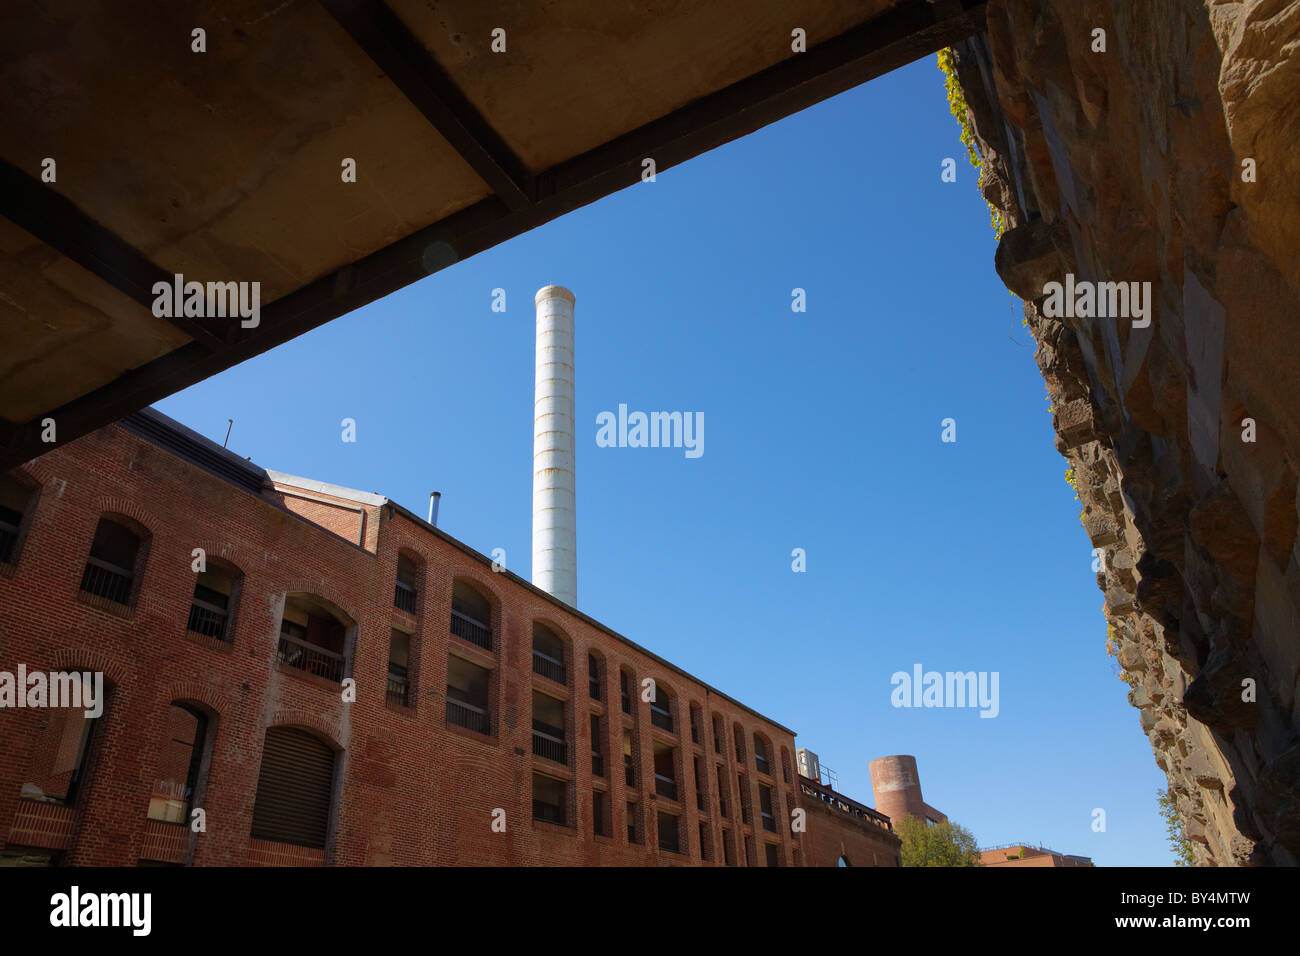 The historic white smokestack of The Powerhouse building as seen from the C&O Canal, Georgetown, Washington, DC. Stock Photo